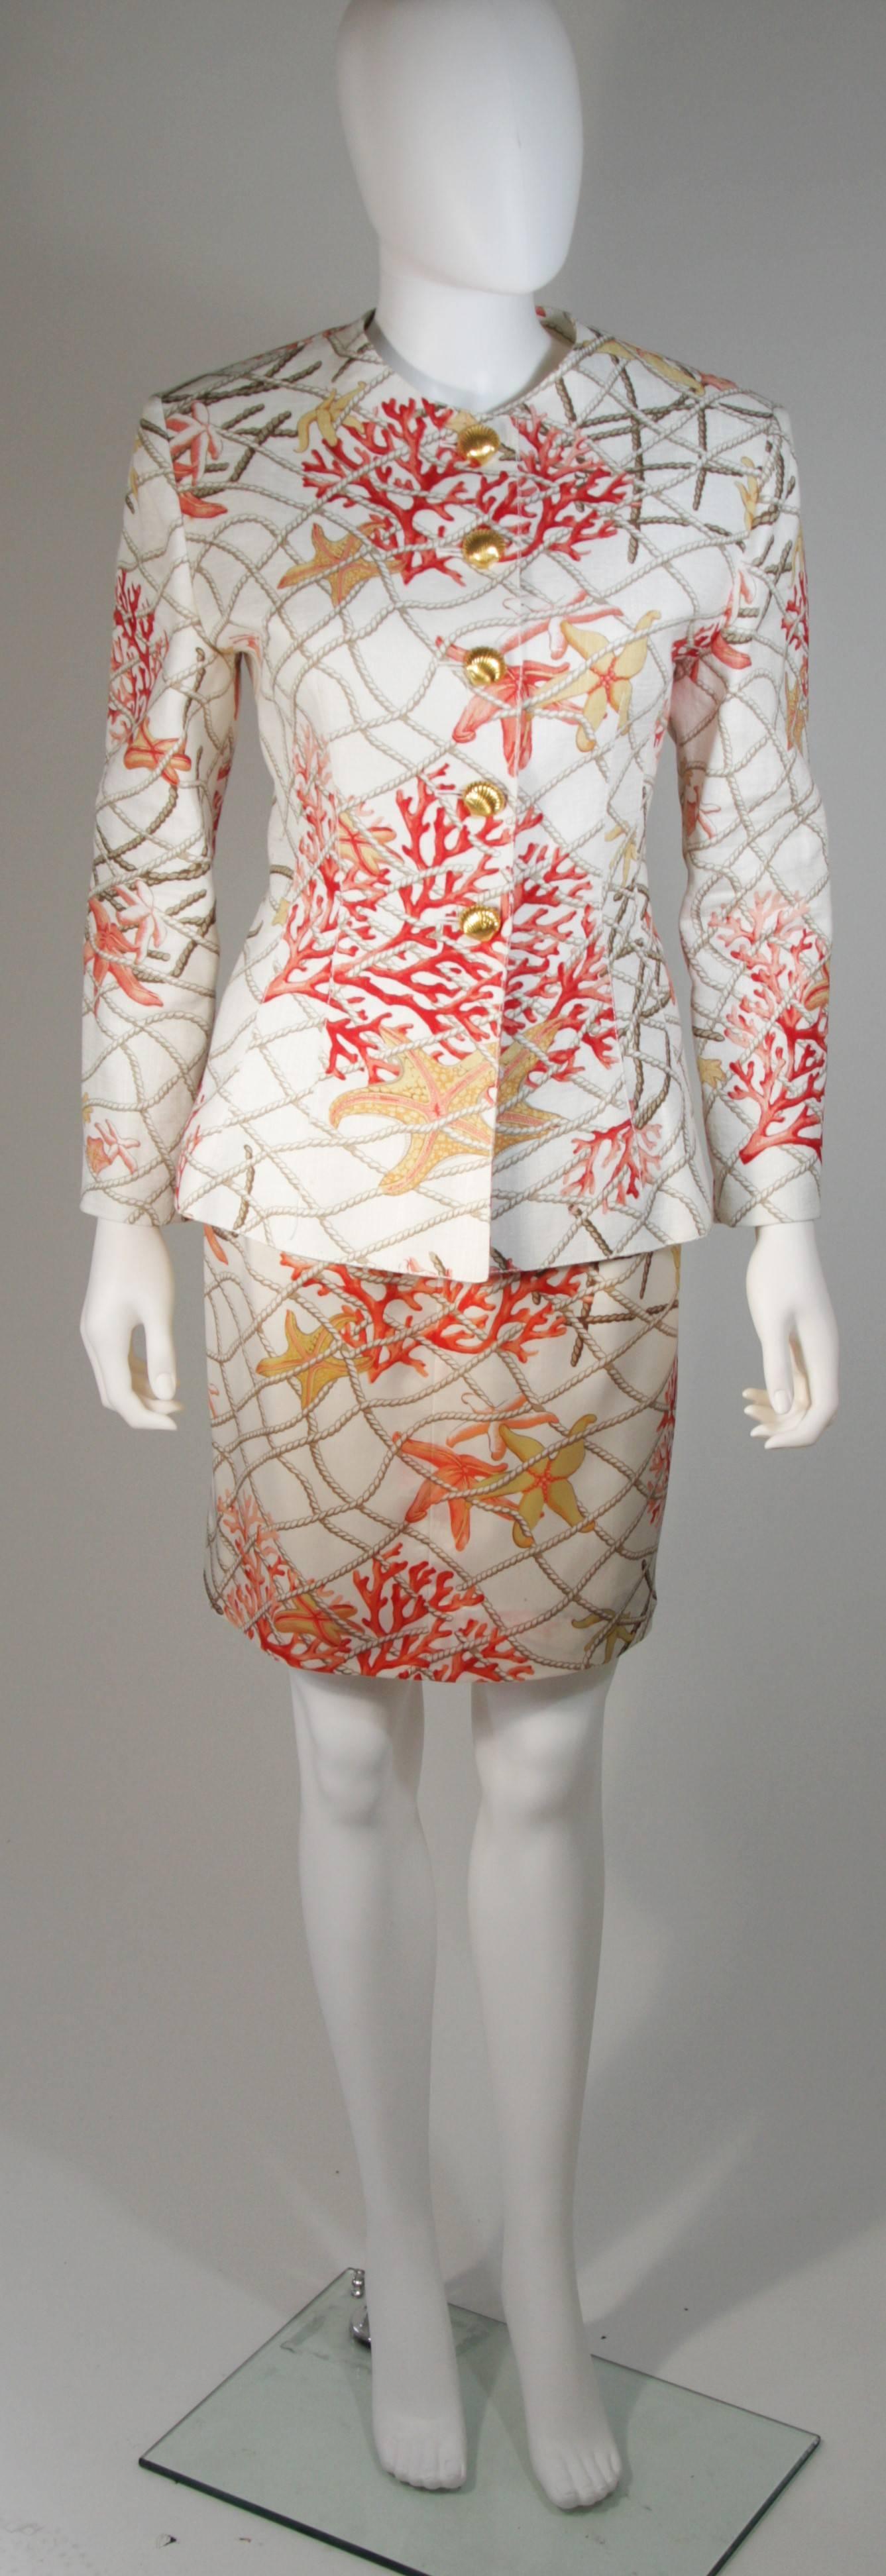 This Valentino design is available for viewing at our Beverly Hills Boutique. We offer a large selection of evening gowns and luxury garments. 

 This skirt suit is features a coral reef theme with rope pattern. The jacket features center front